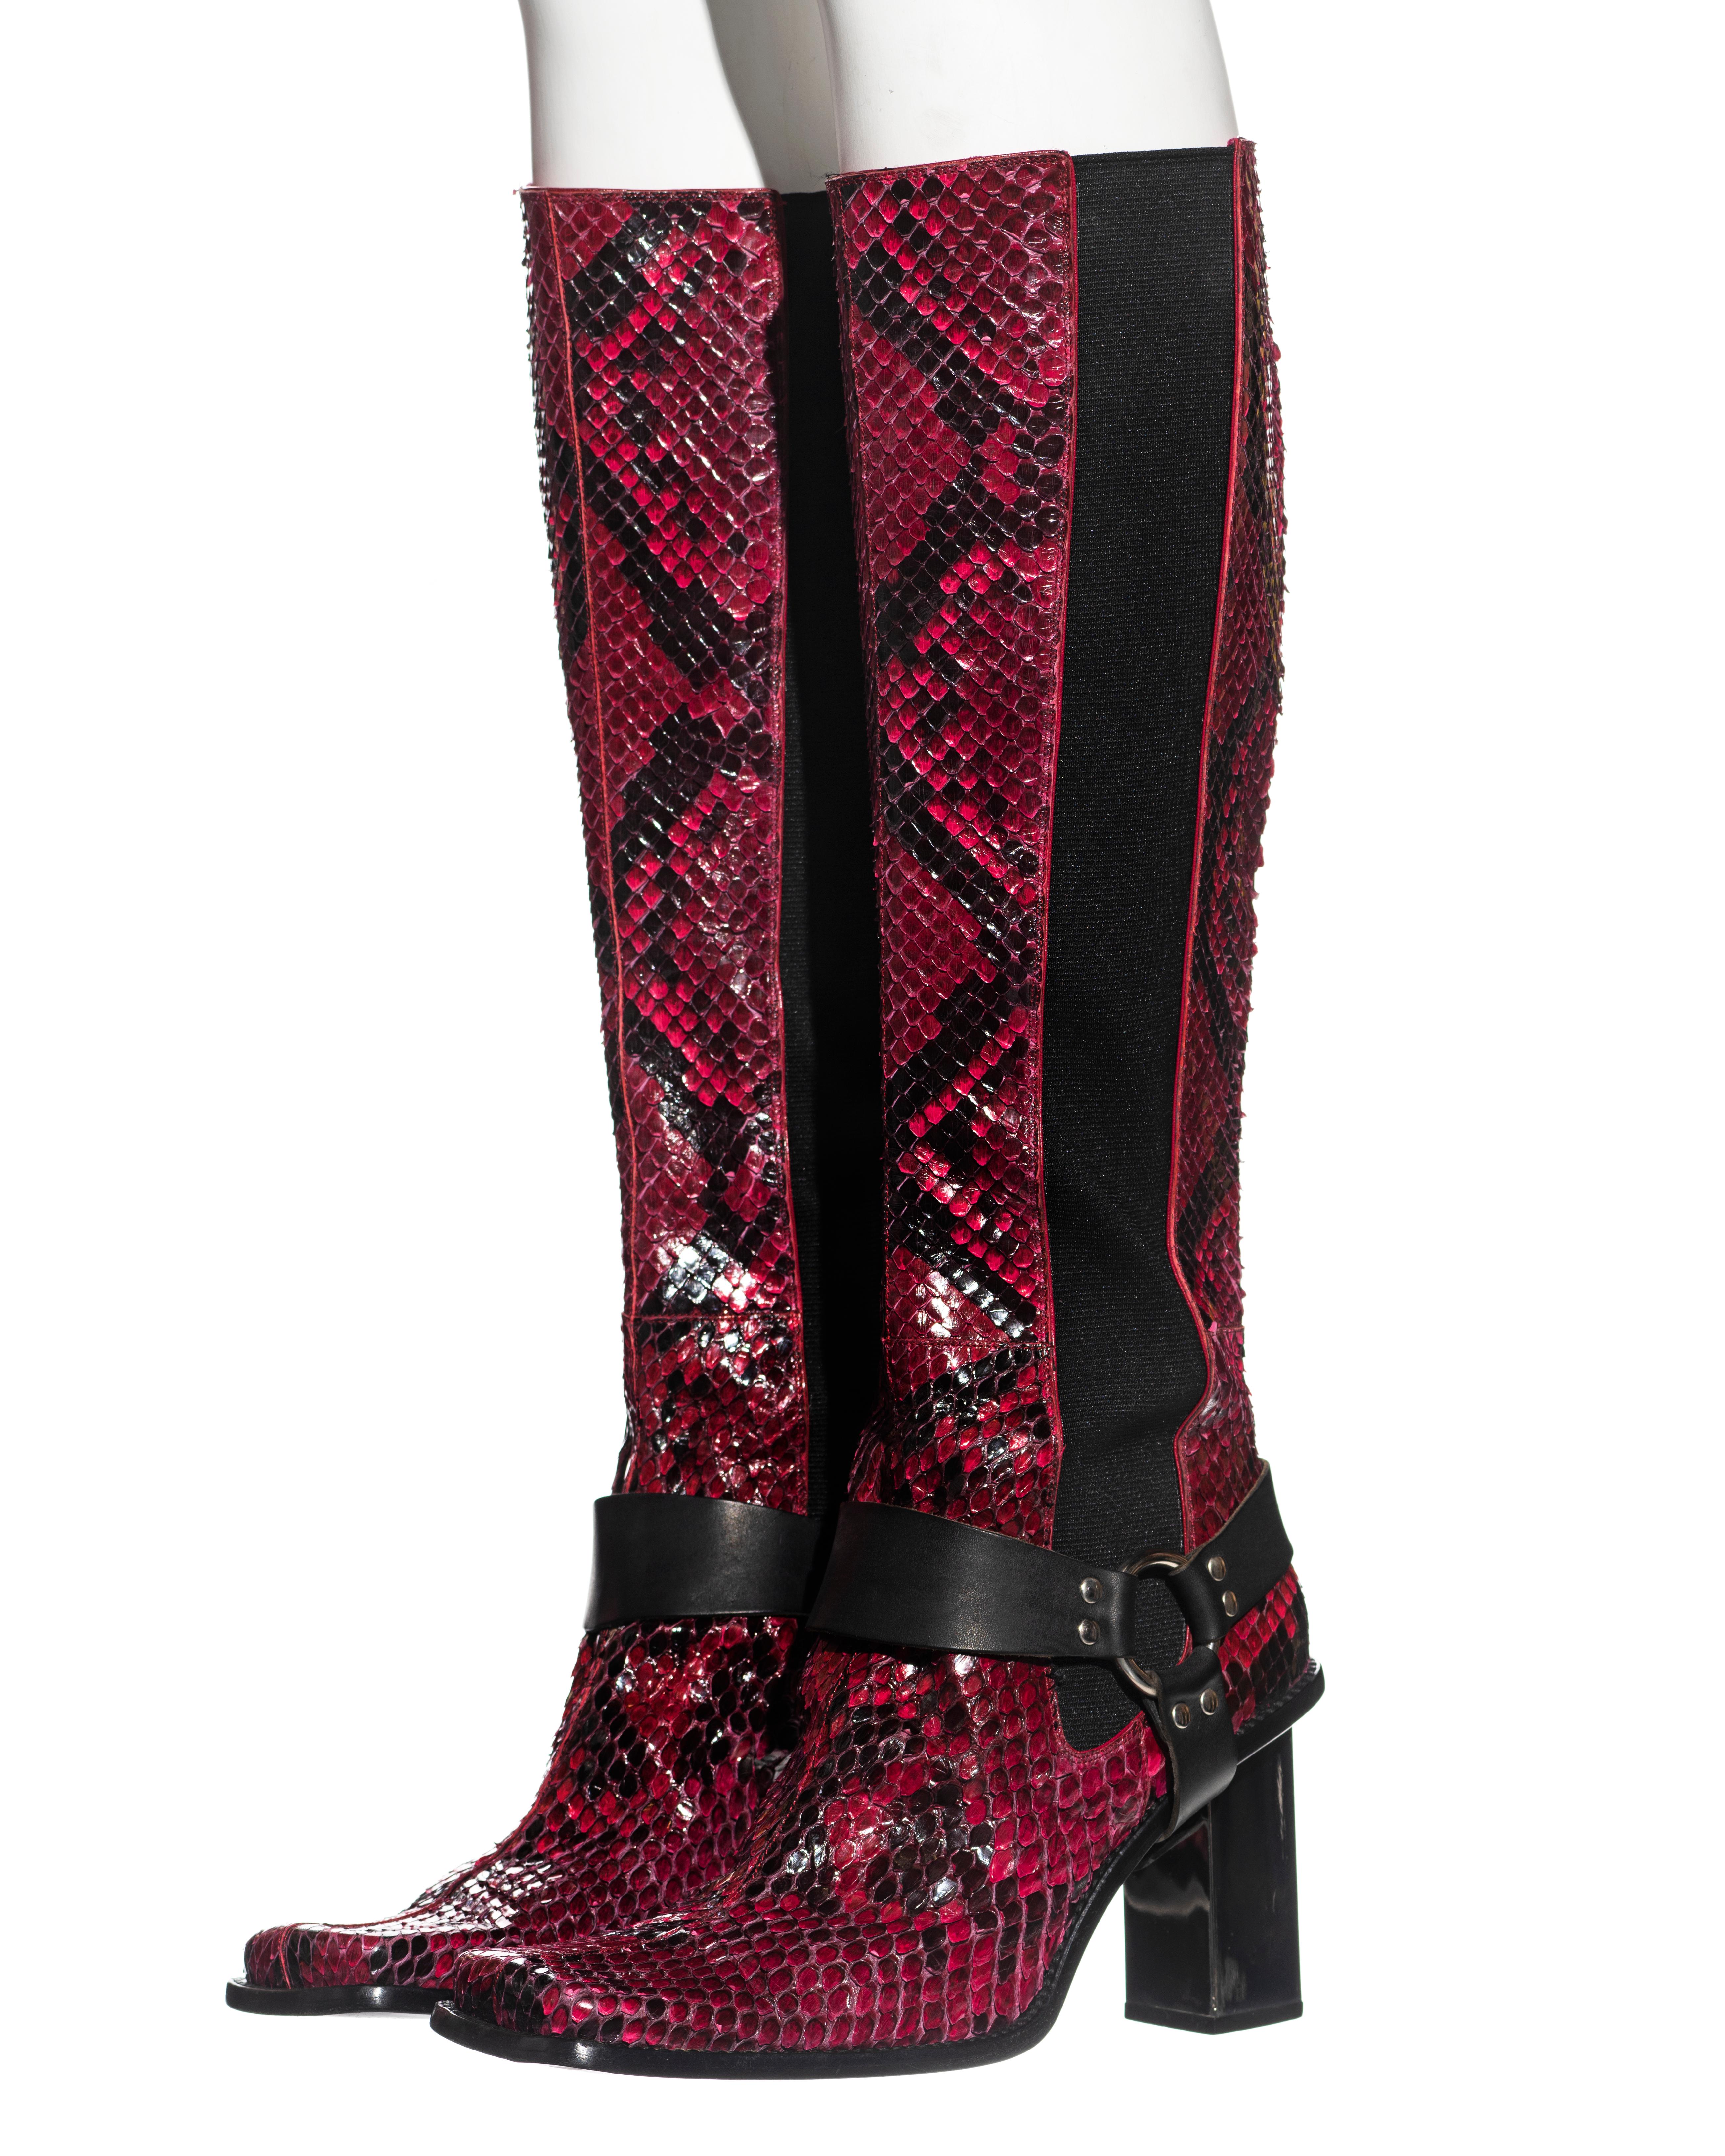 Dolce & Gabbana raspberry python boots with mirrored heels, fw 1999 In Excellent Condition For Sale In London, GB